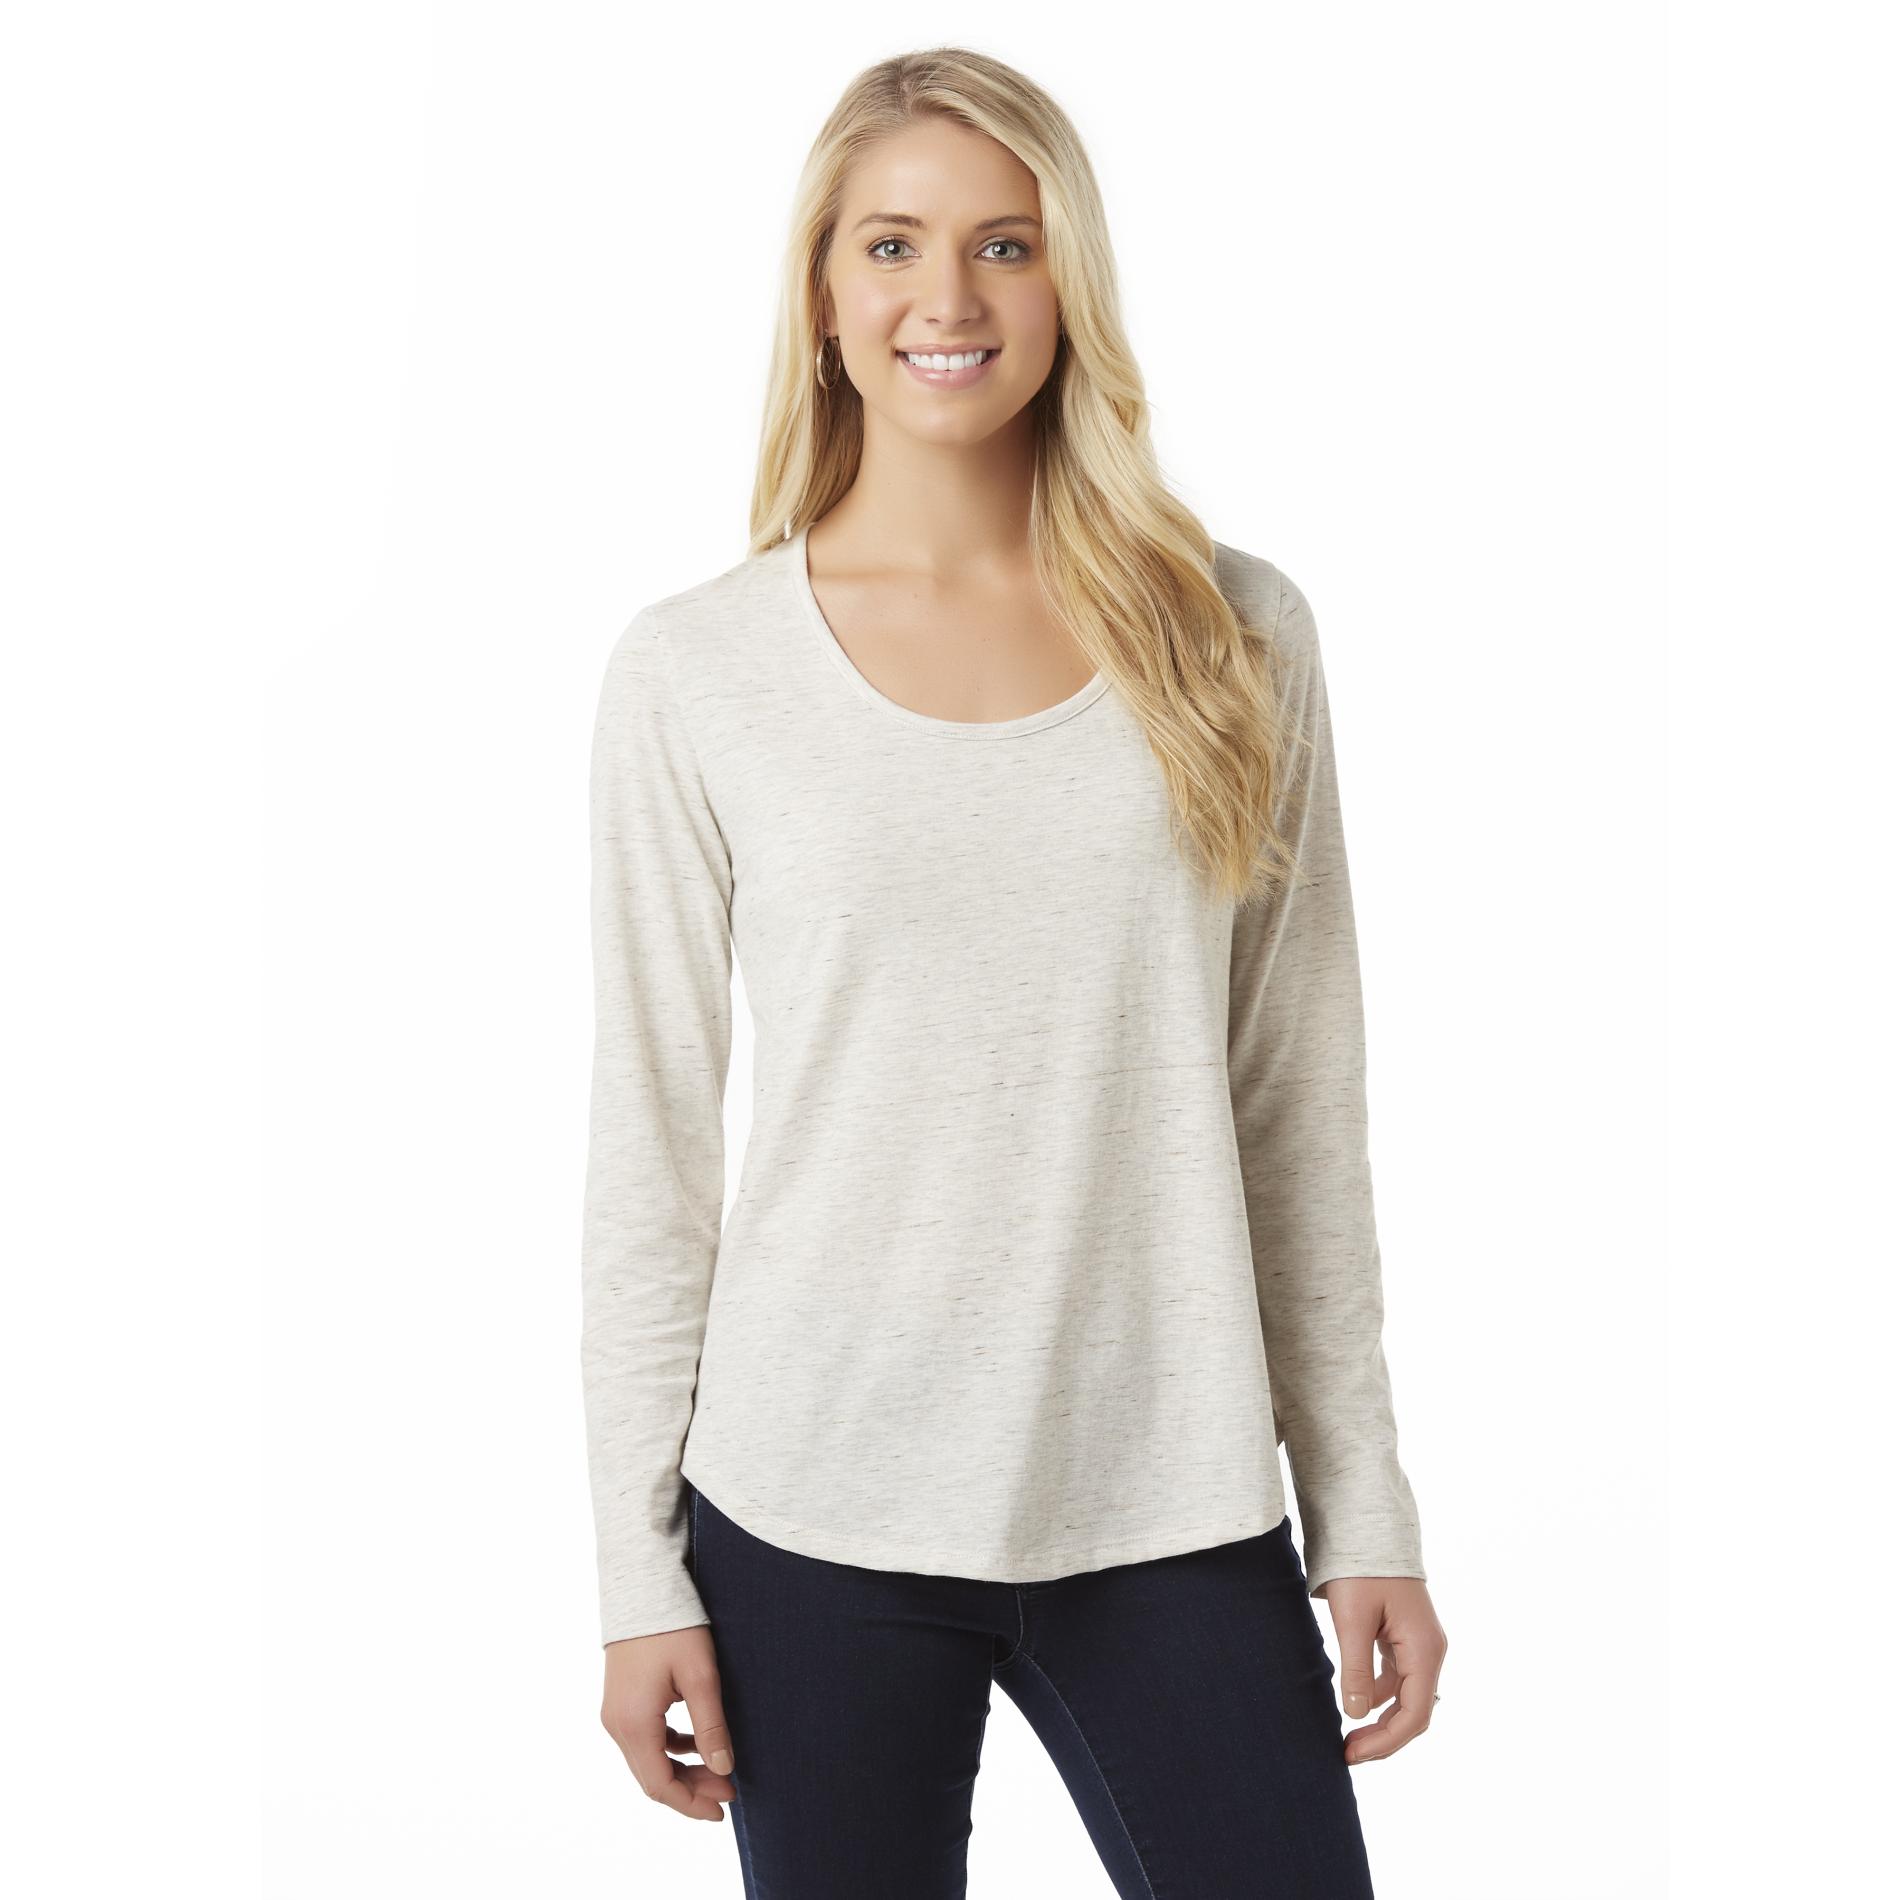 Canyon River Blues Women's Scoop Neck Top - Space Dyed